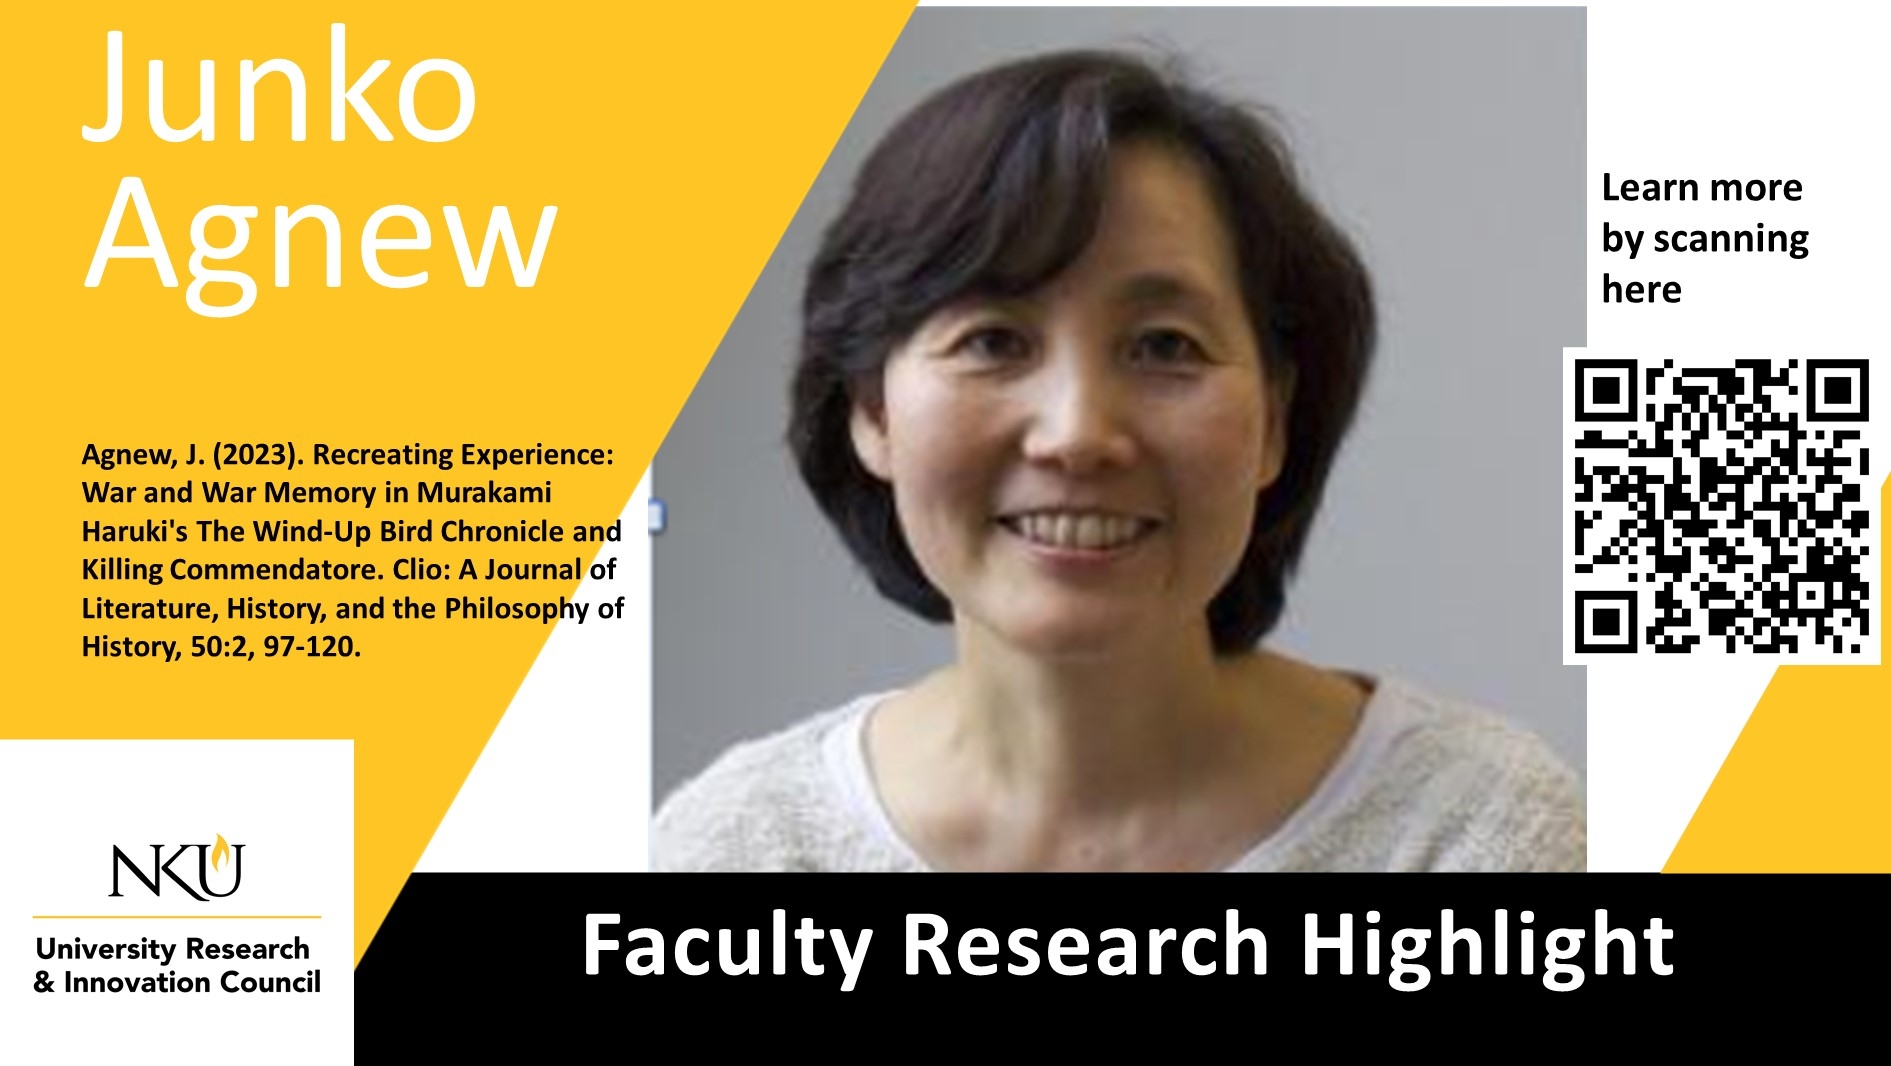 Highlighting Junko Agnew's research